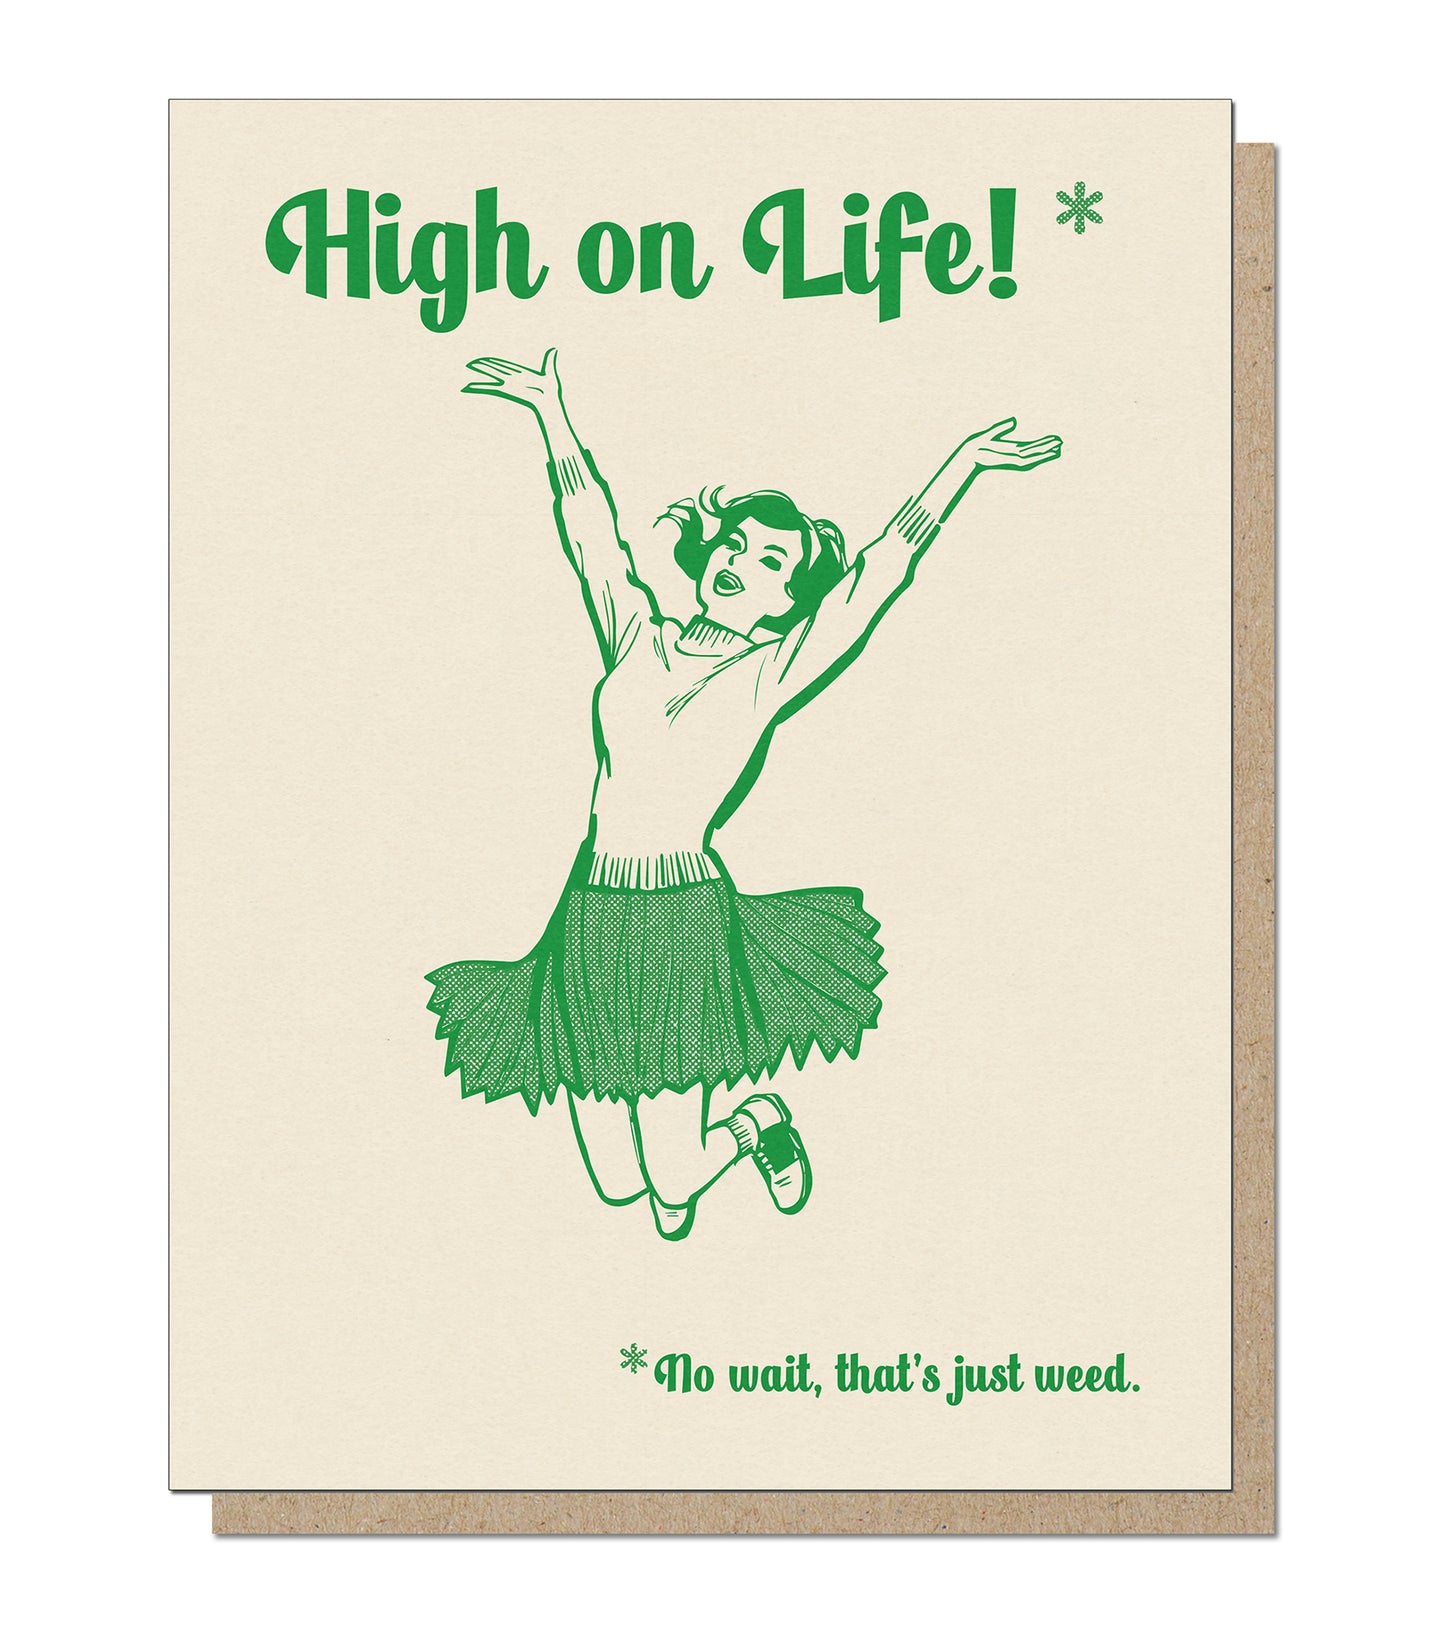 High on Life, No Wait that's just Weed. Funny Letterpress Greeting Card.